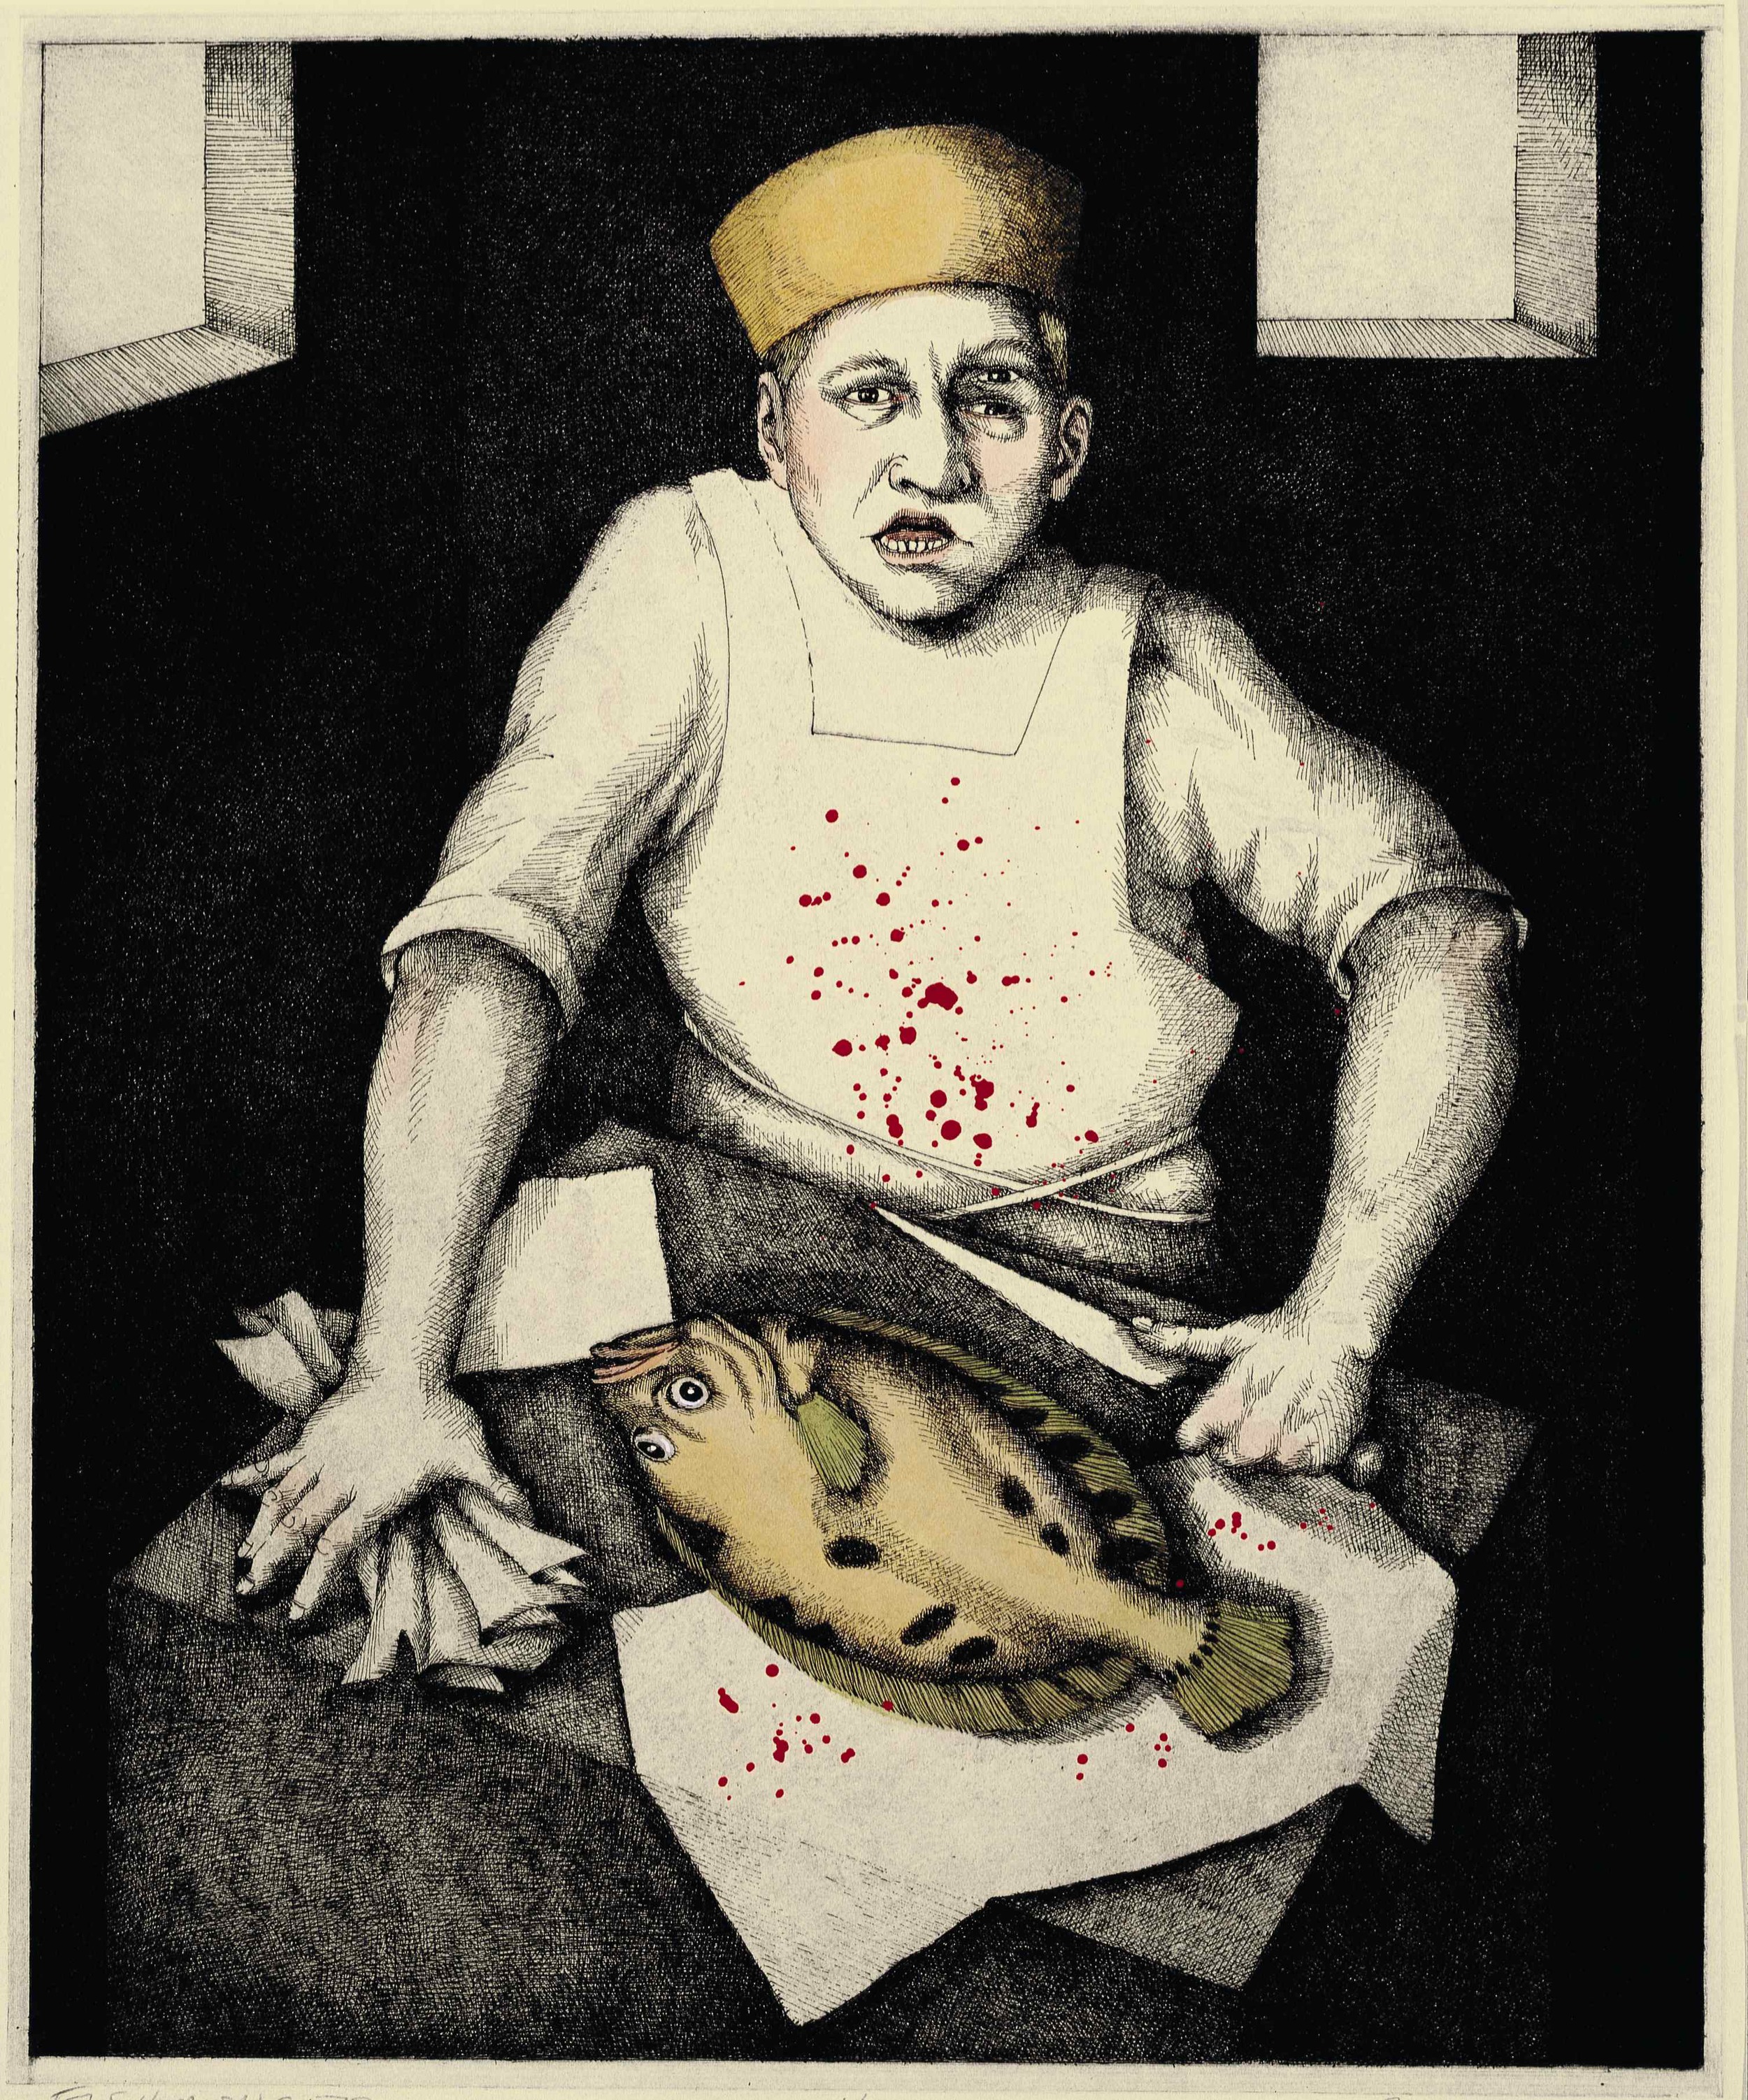 Fishmonger   2003 , ed. 50, etching with gouache 13x10 in.